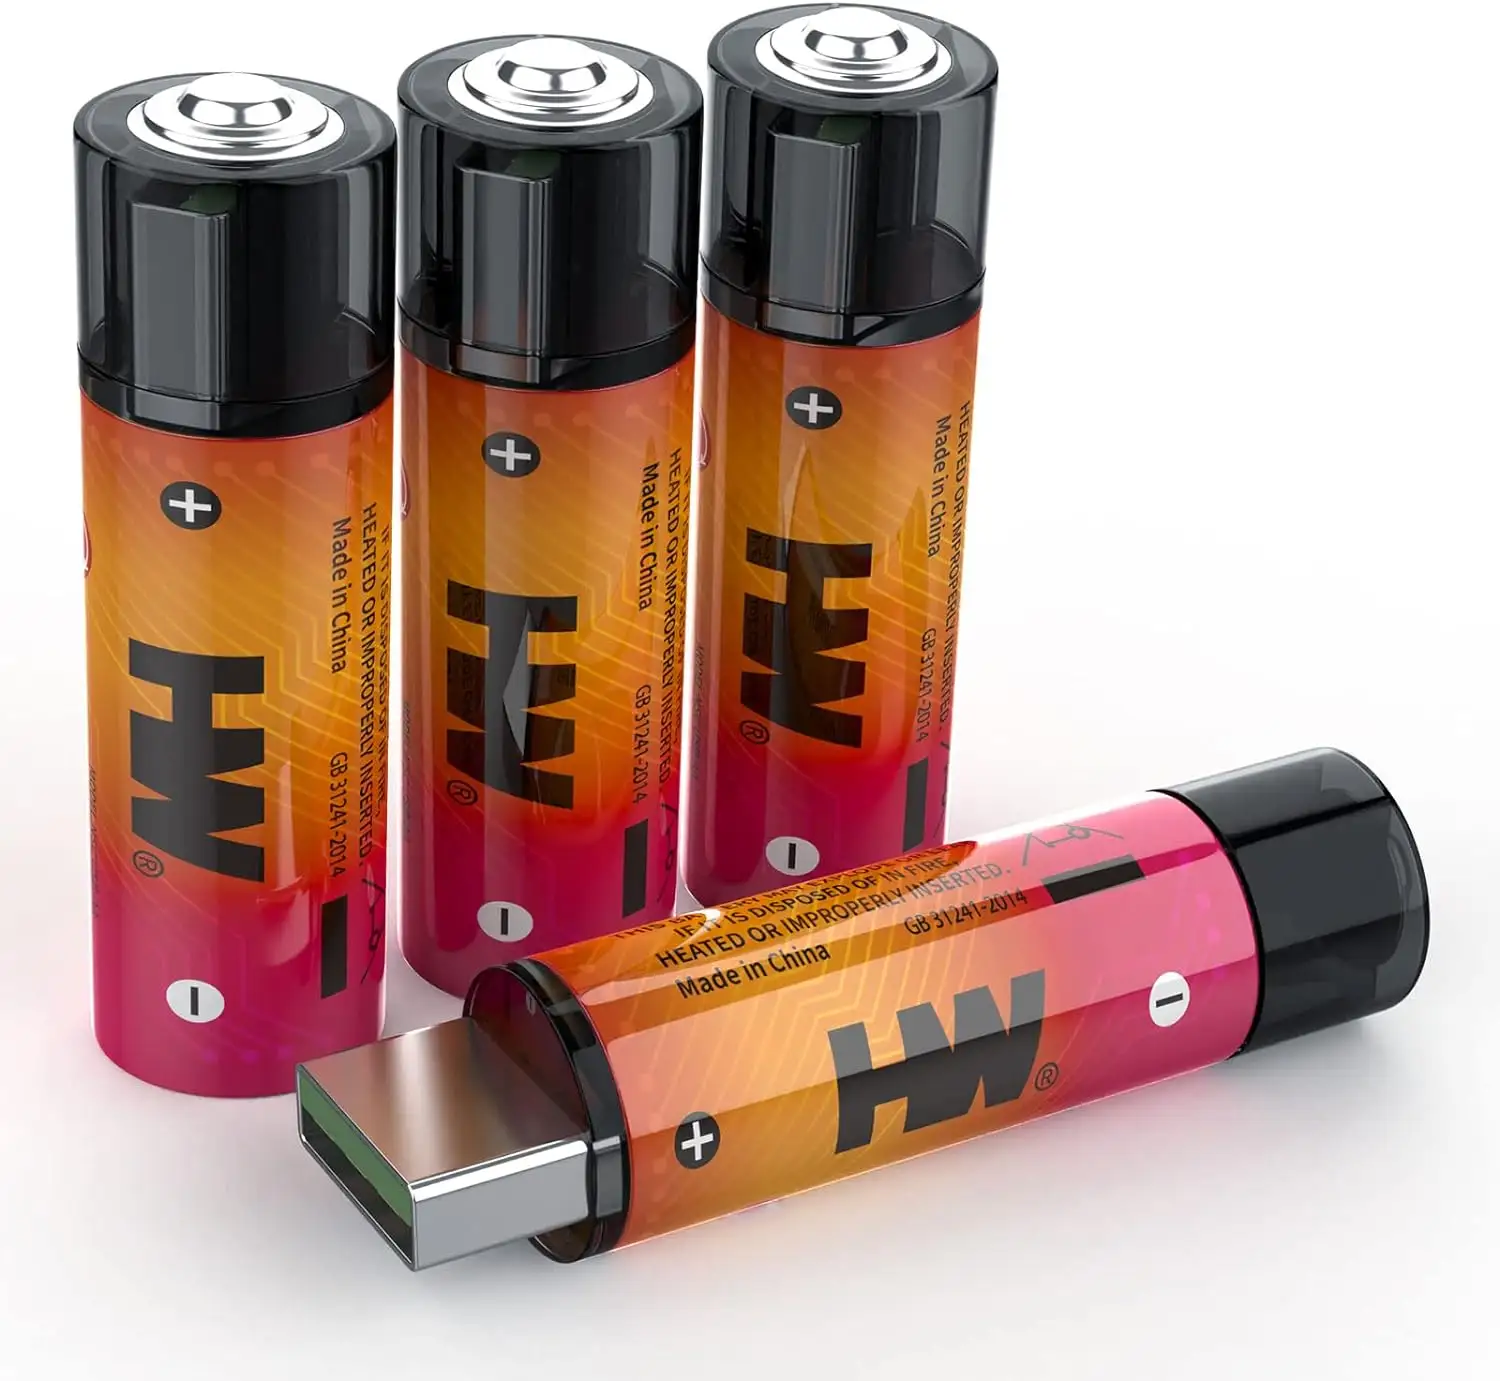 Micro USB Rechargeable Batteries: Easy Power for Your Equipment